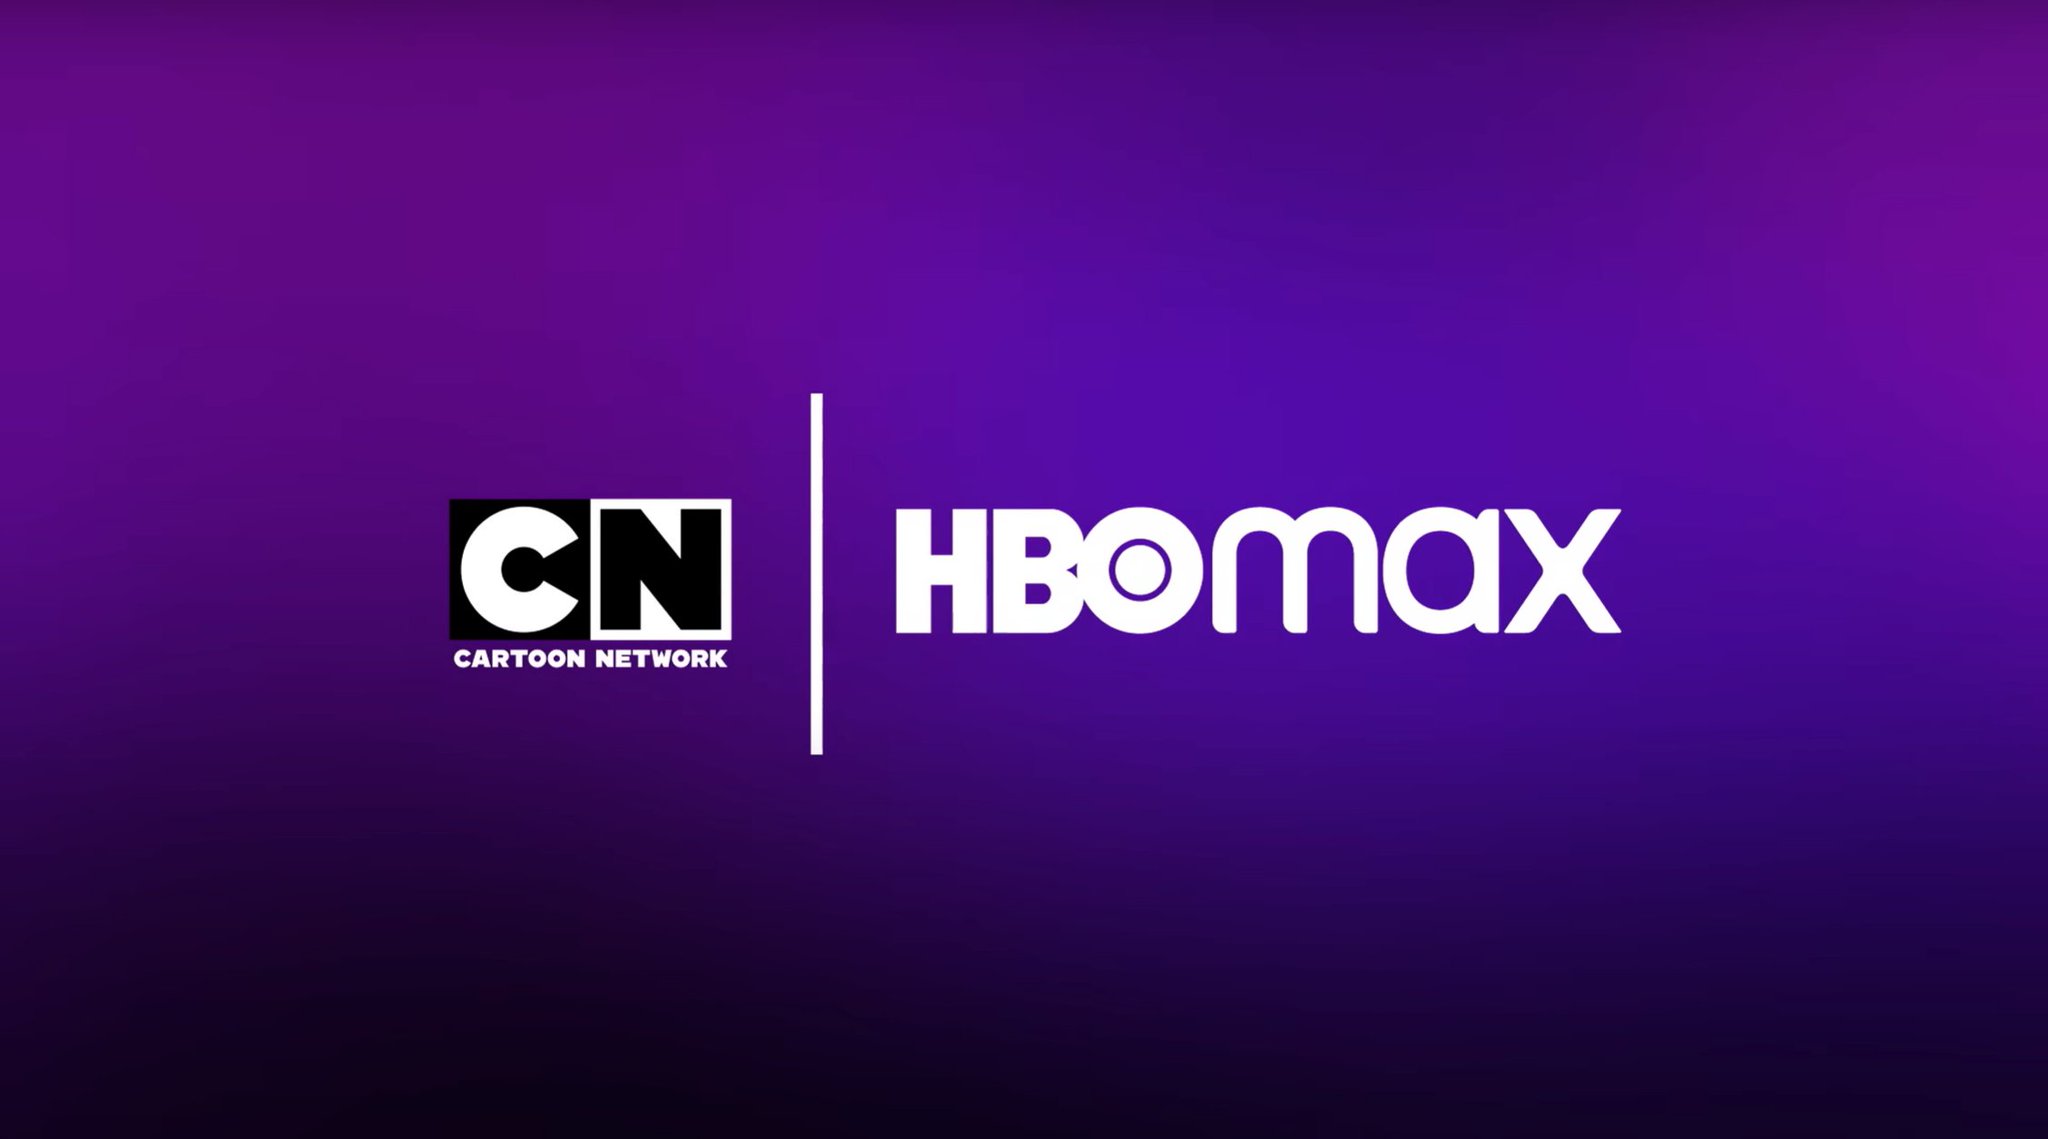 Cartoon Network on X: OOOOOoooh! 🔥 All seasons of these throwback shows  are streaming on @HBOMax NOWWhich one will you binge first? # cartoonnetwork #cnlegacy #hbomax #OldSchoolCartoons   / X